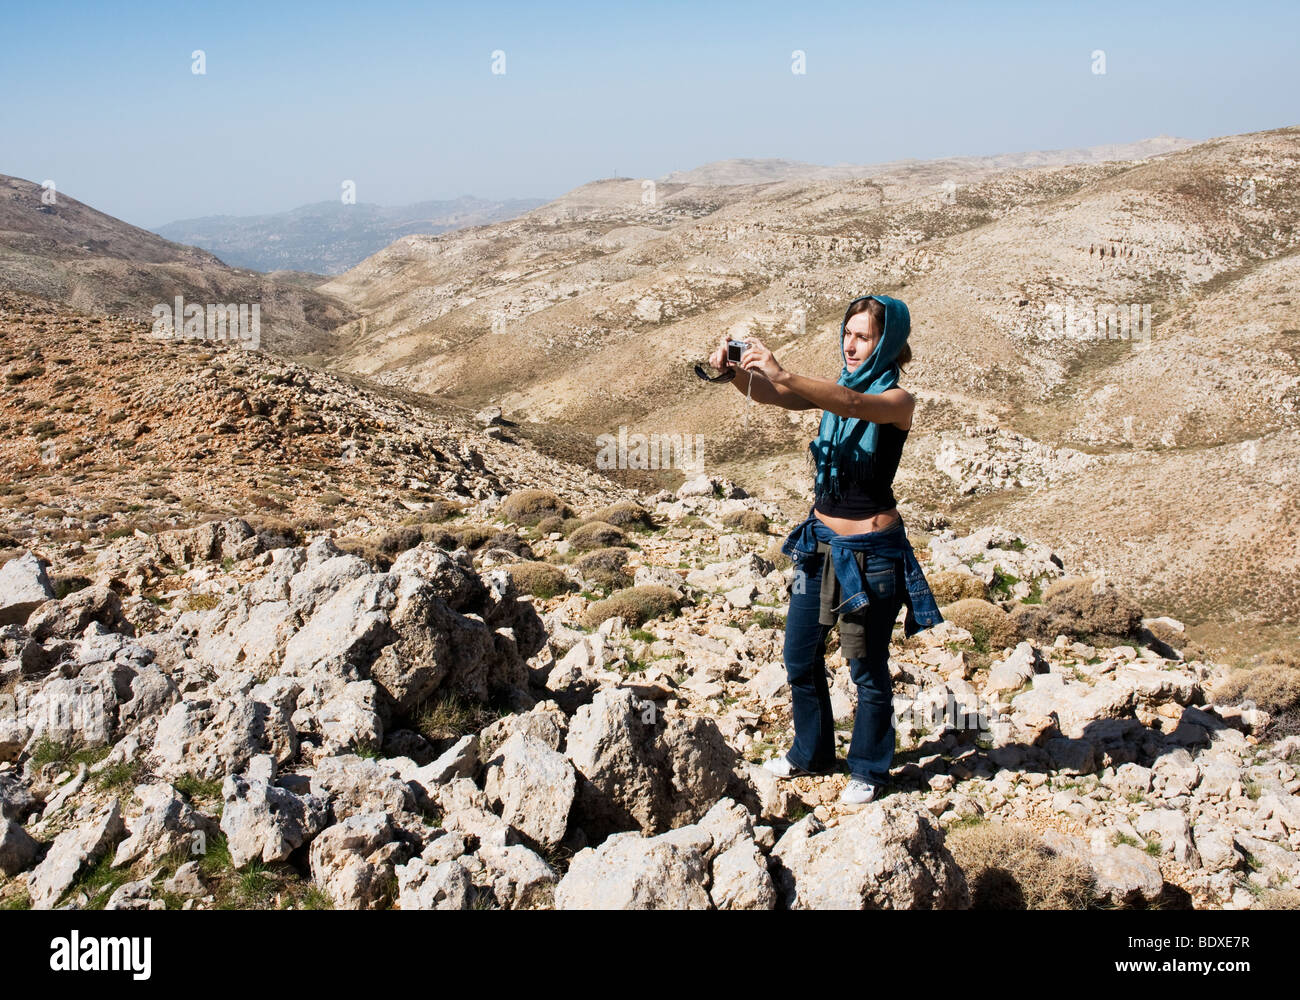 A young western woman, wearing a headscarf as protection against the sun, photographs herself in the Chabrouh mountains, Lebanon Stock Photo